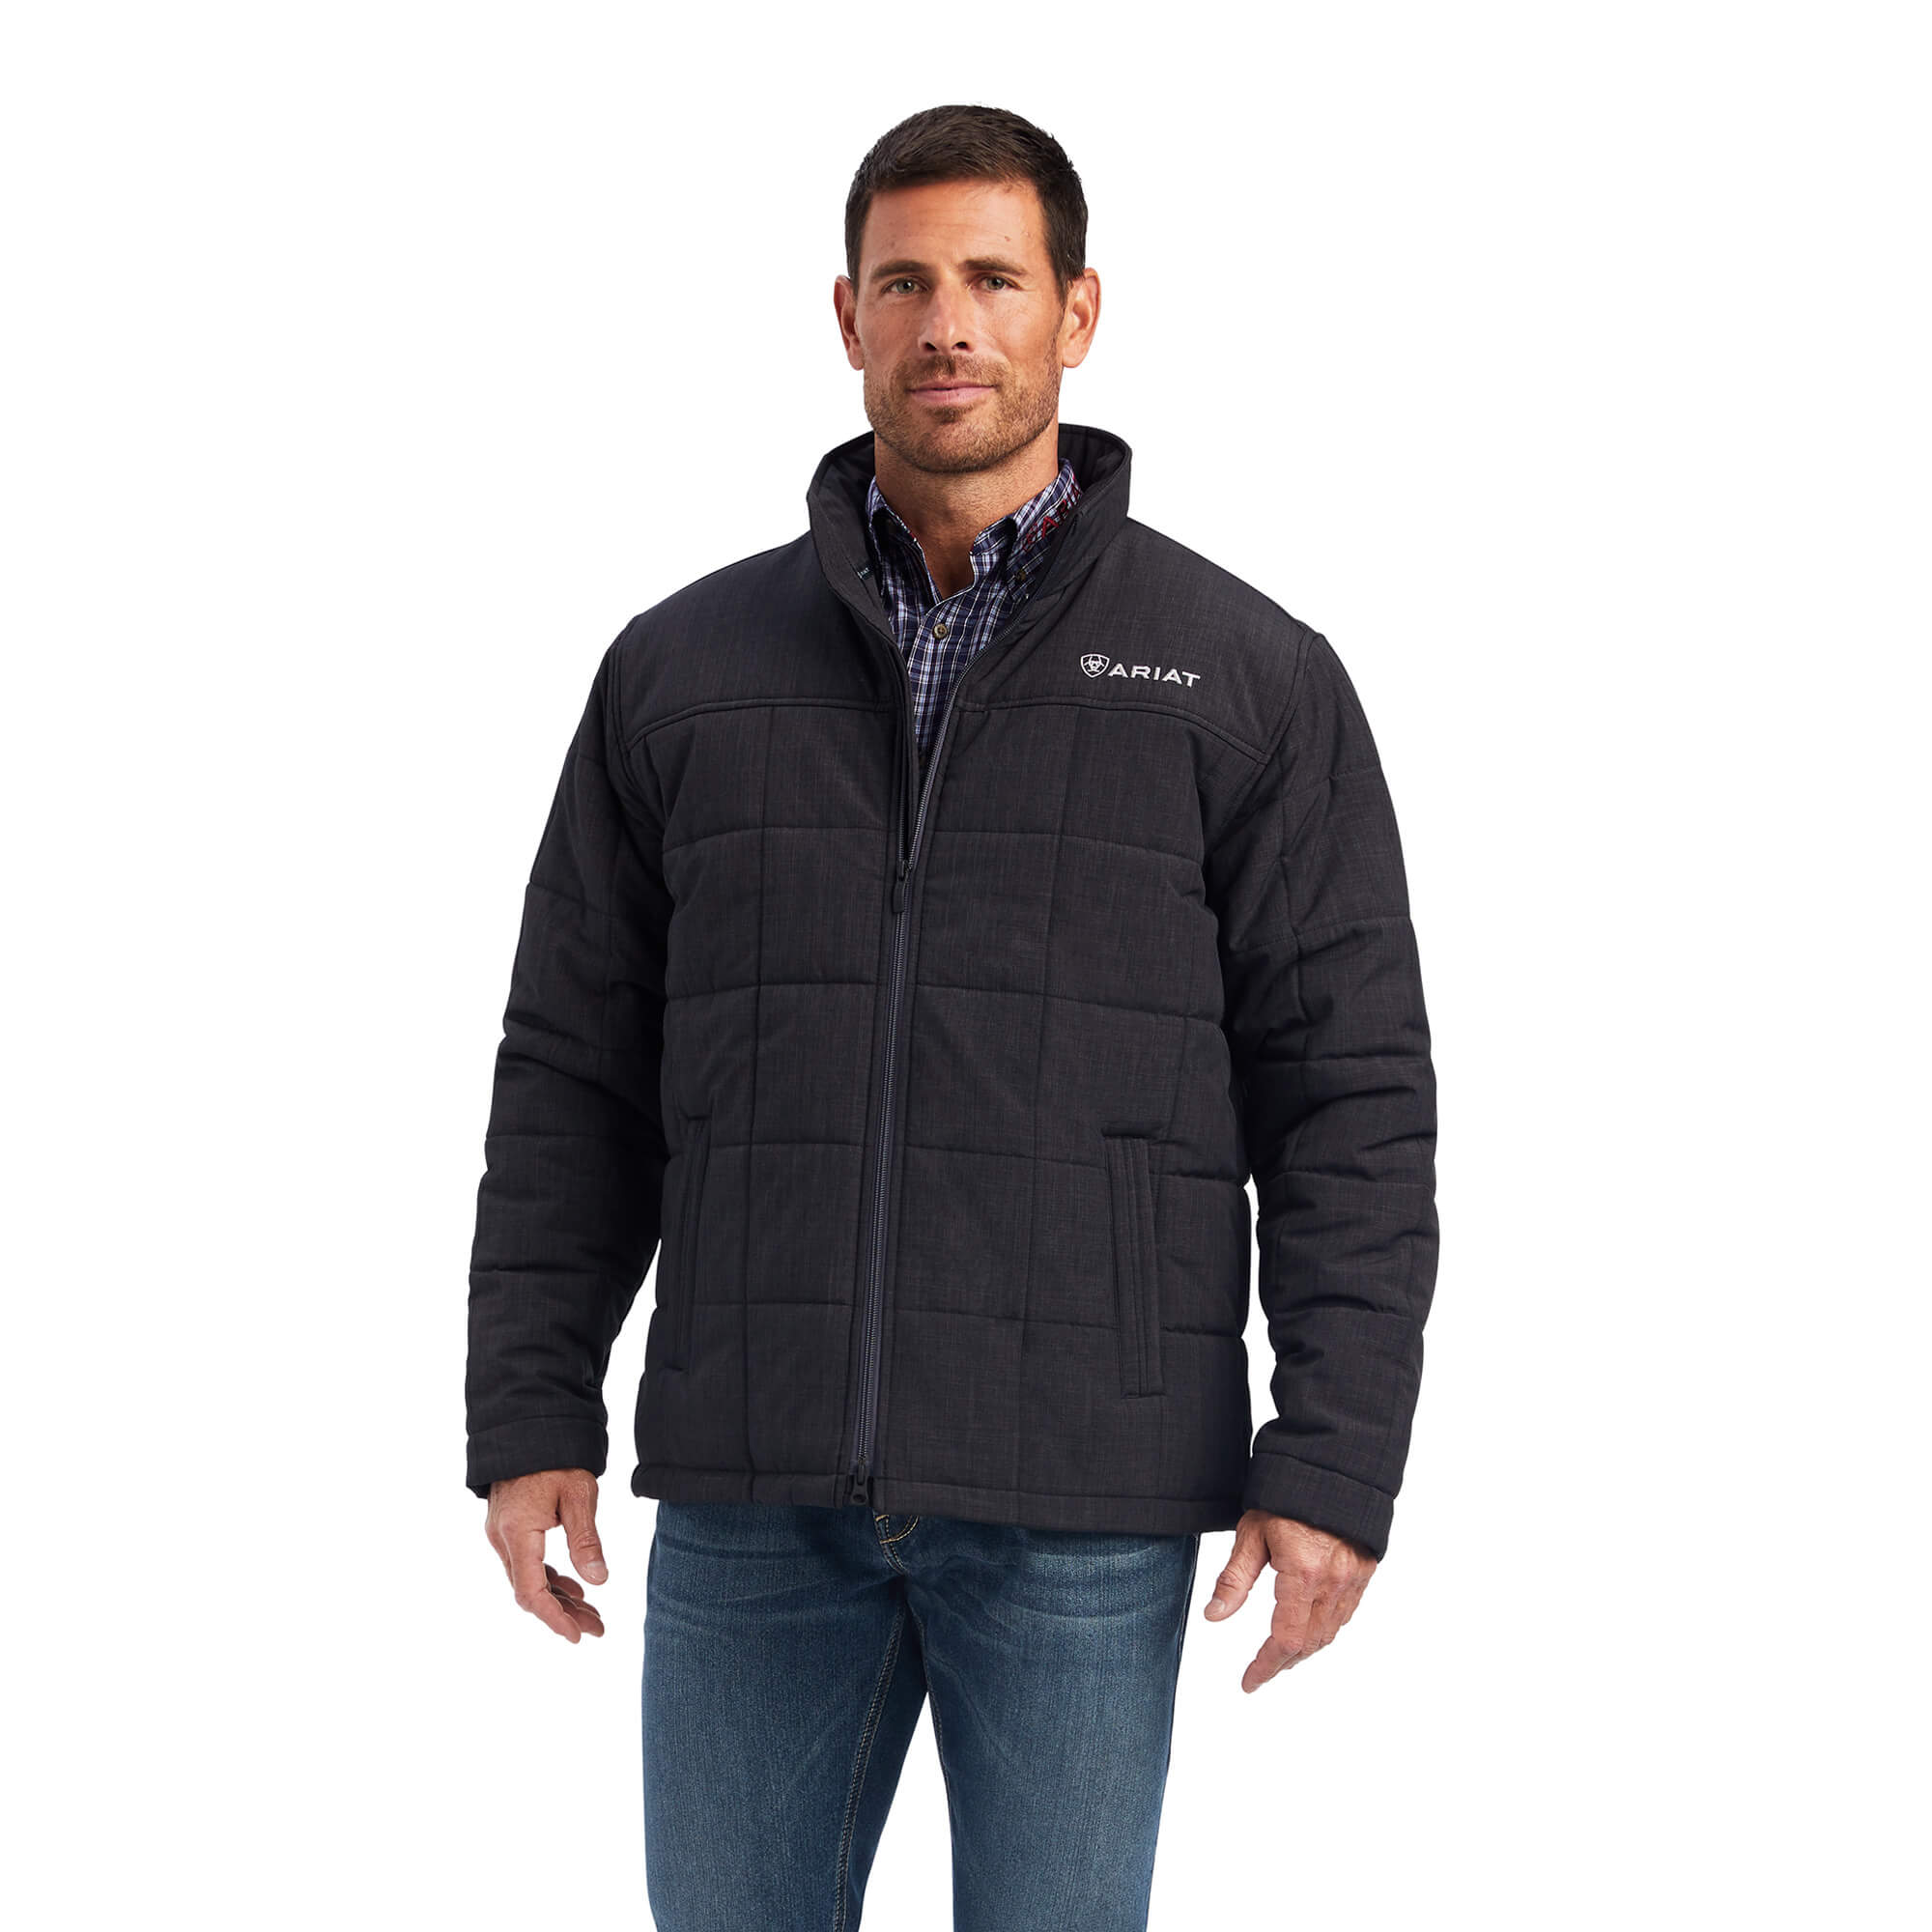 Ariat Crius Insulated Concealed Carry Jacket